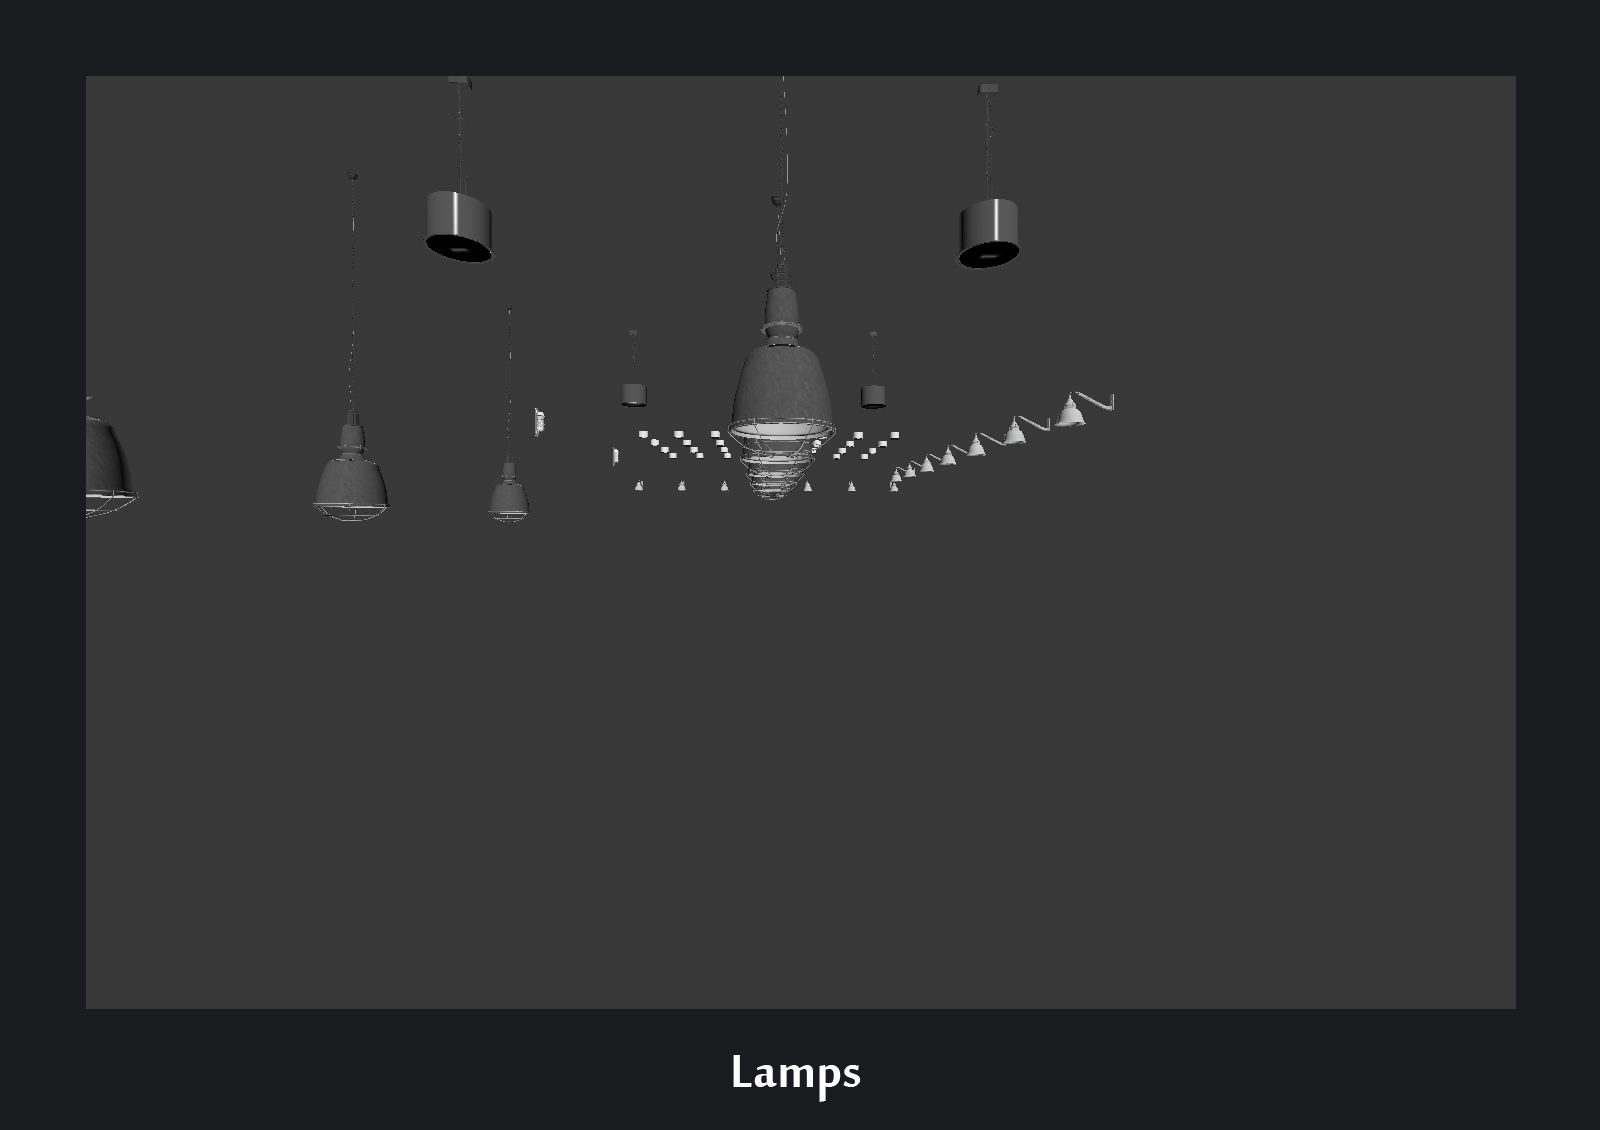 006_Lamps_evermotion_042.jpg